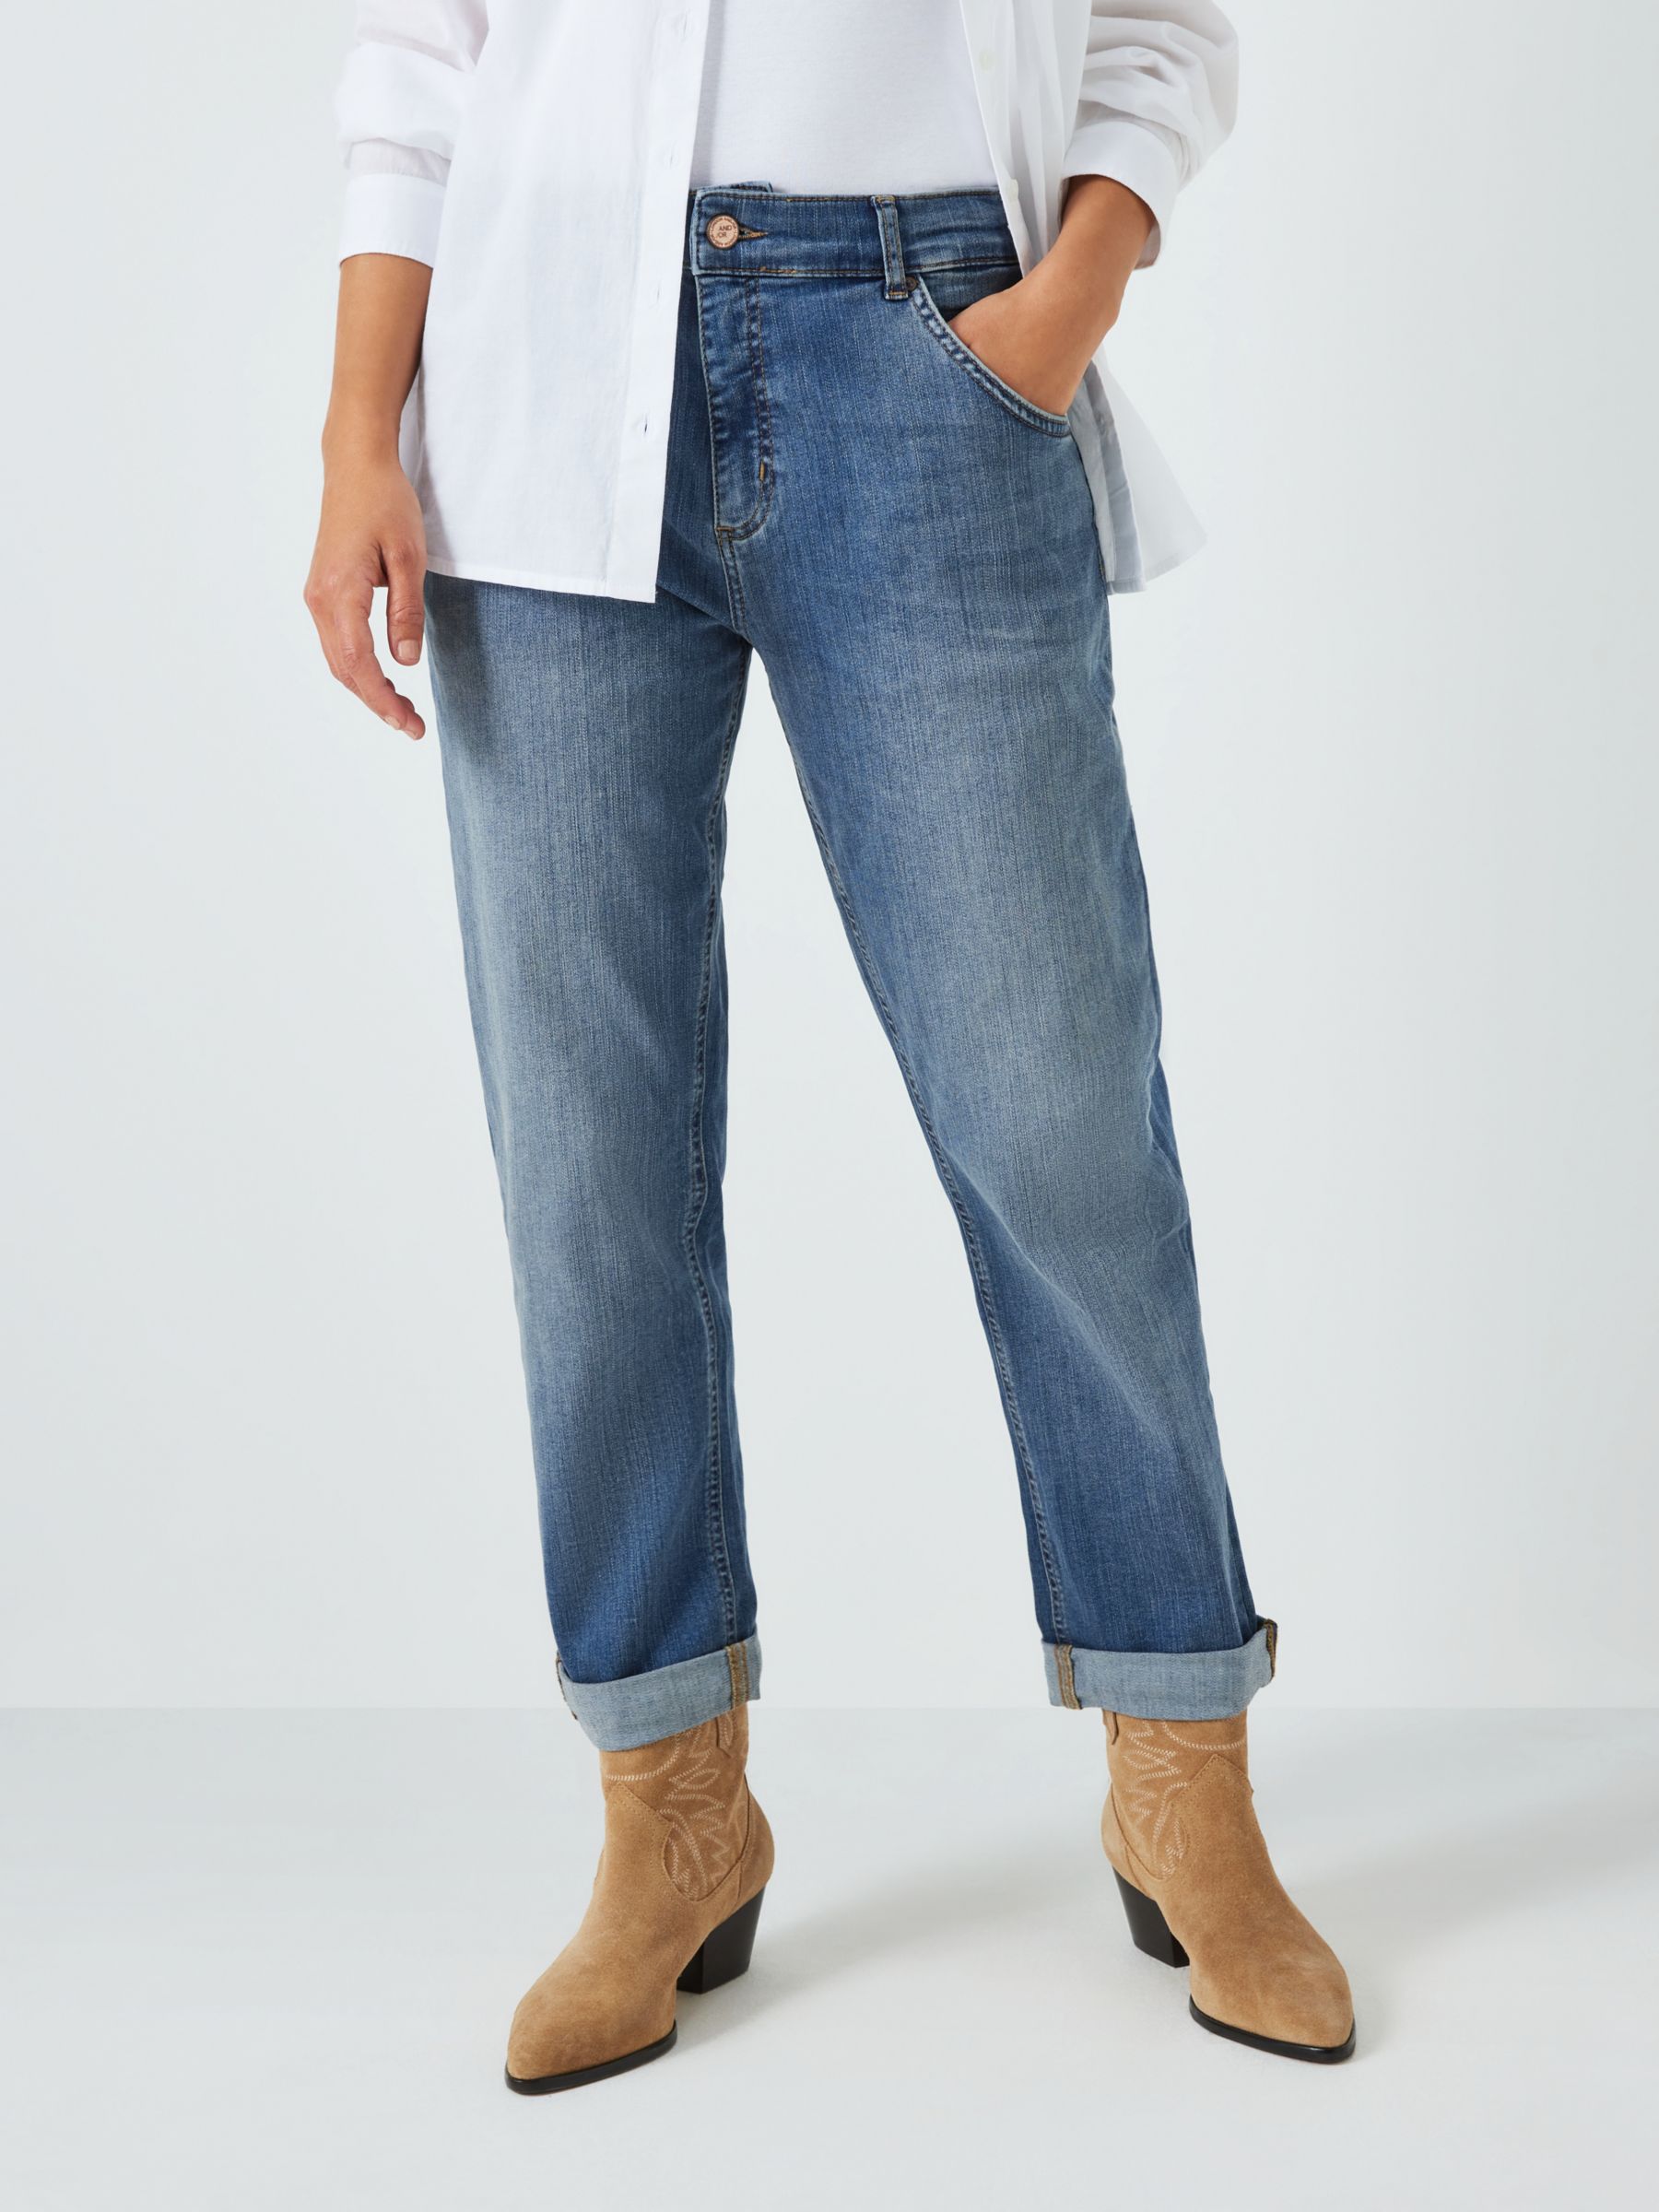 AND/OR Venice Beach Boyfriend Jeans, Mar Lewis Partners